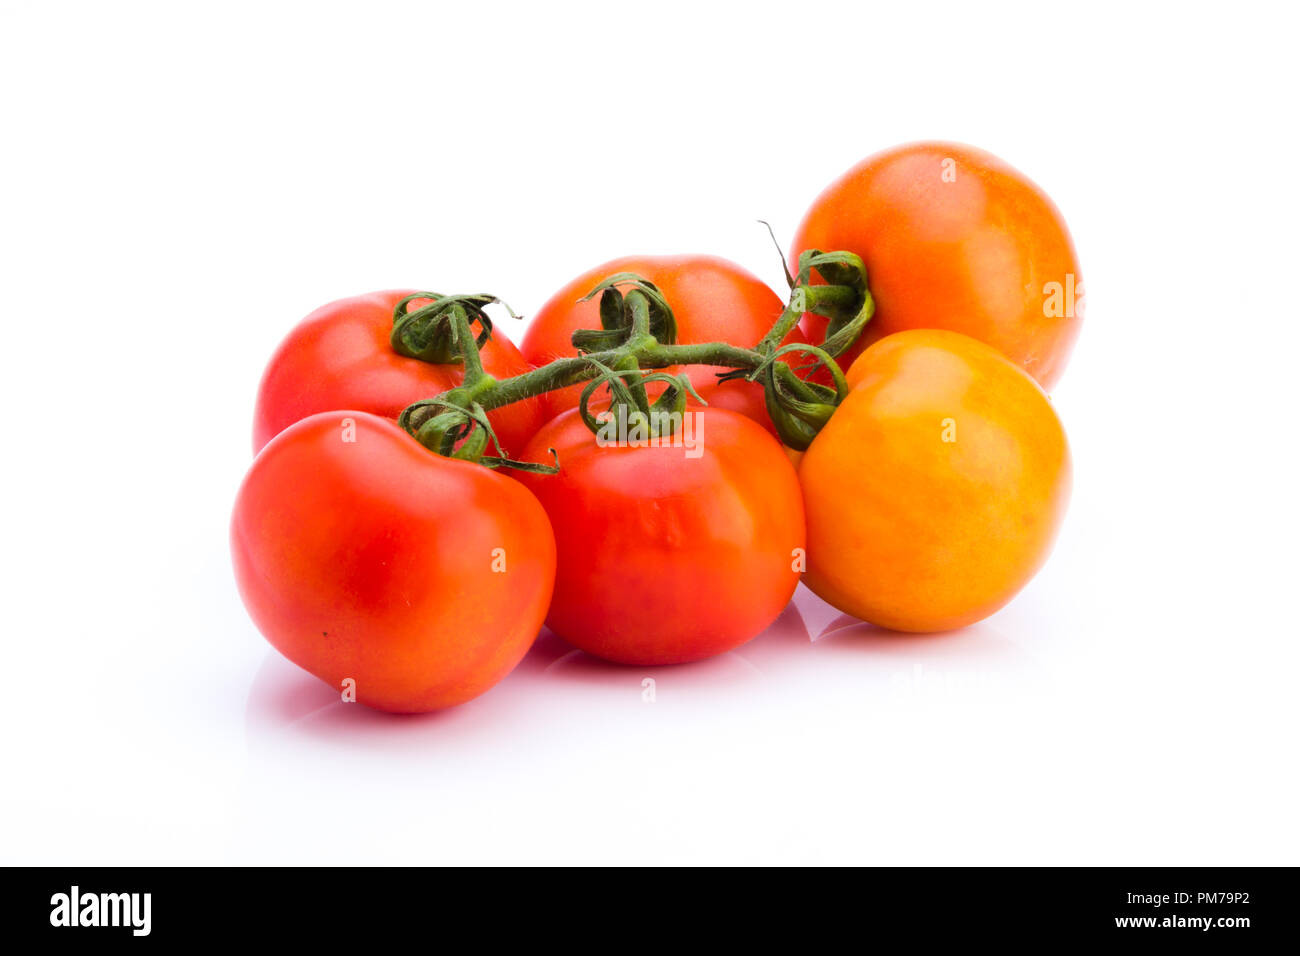 Cluster of fresh tomatoes on a white background, Ideal vegetable for a balanced diet, photo taken in studio Stock Photo